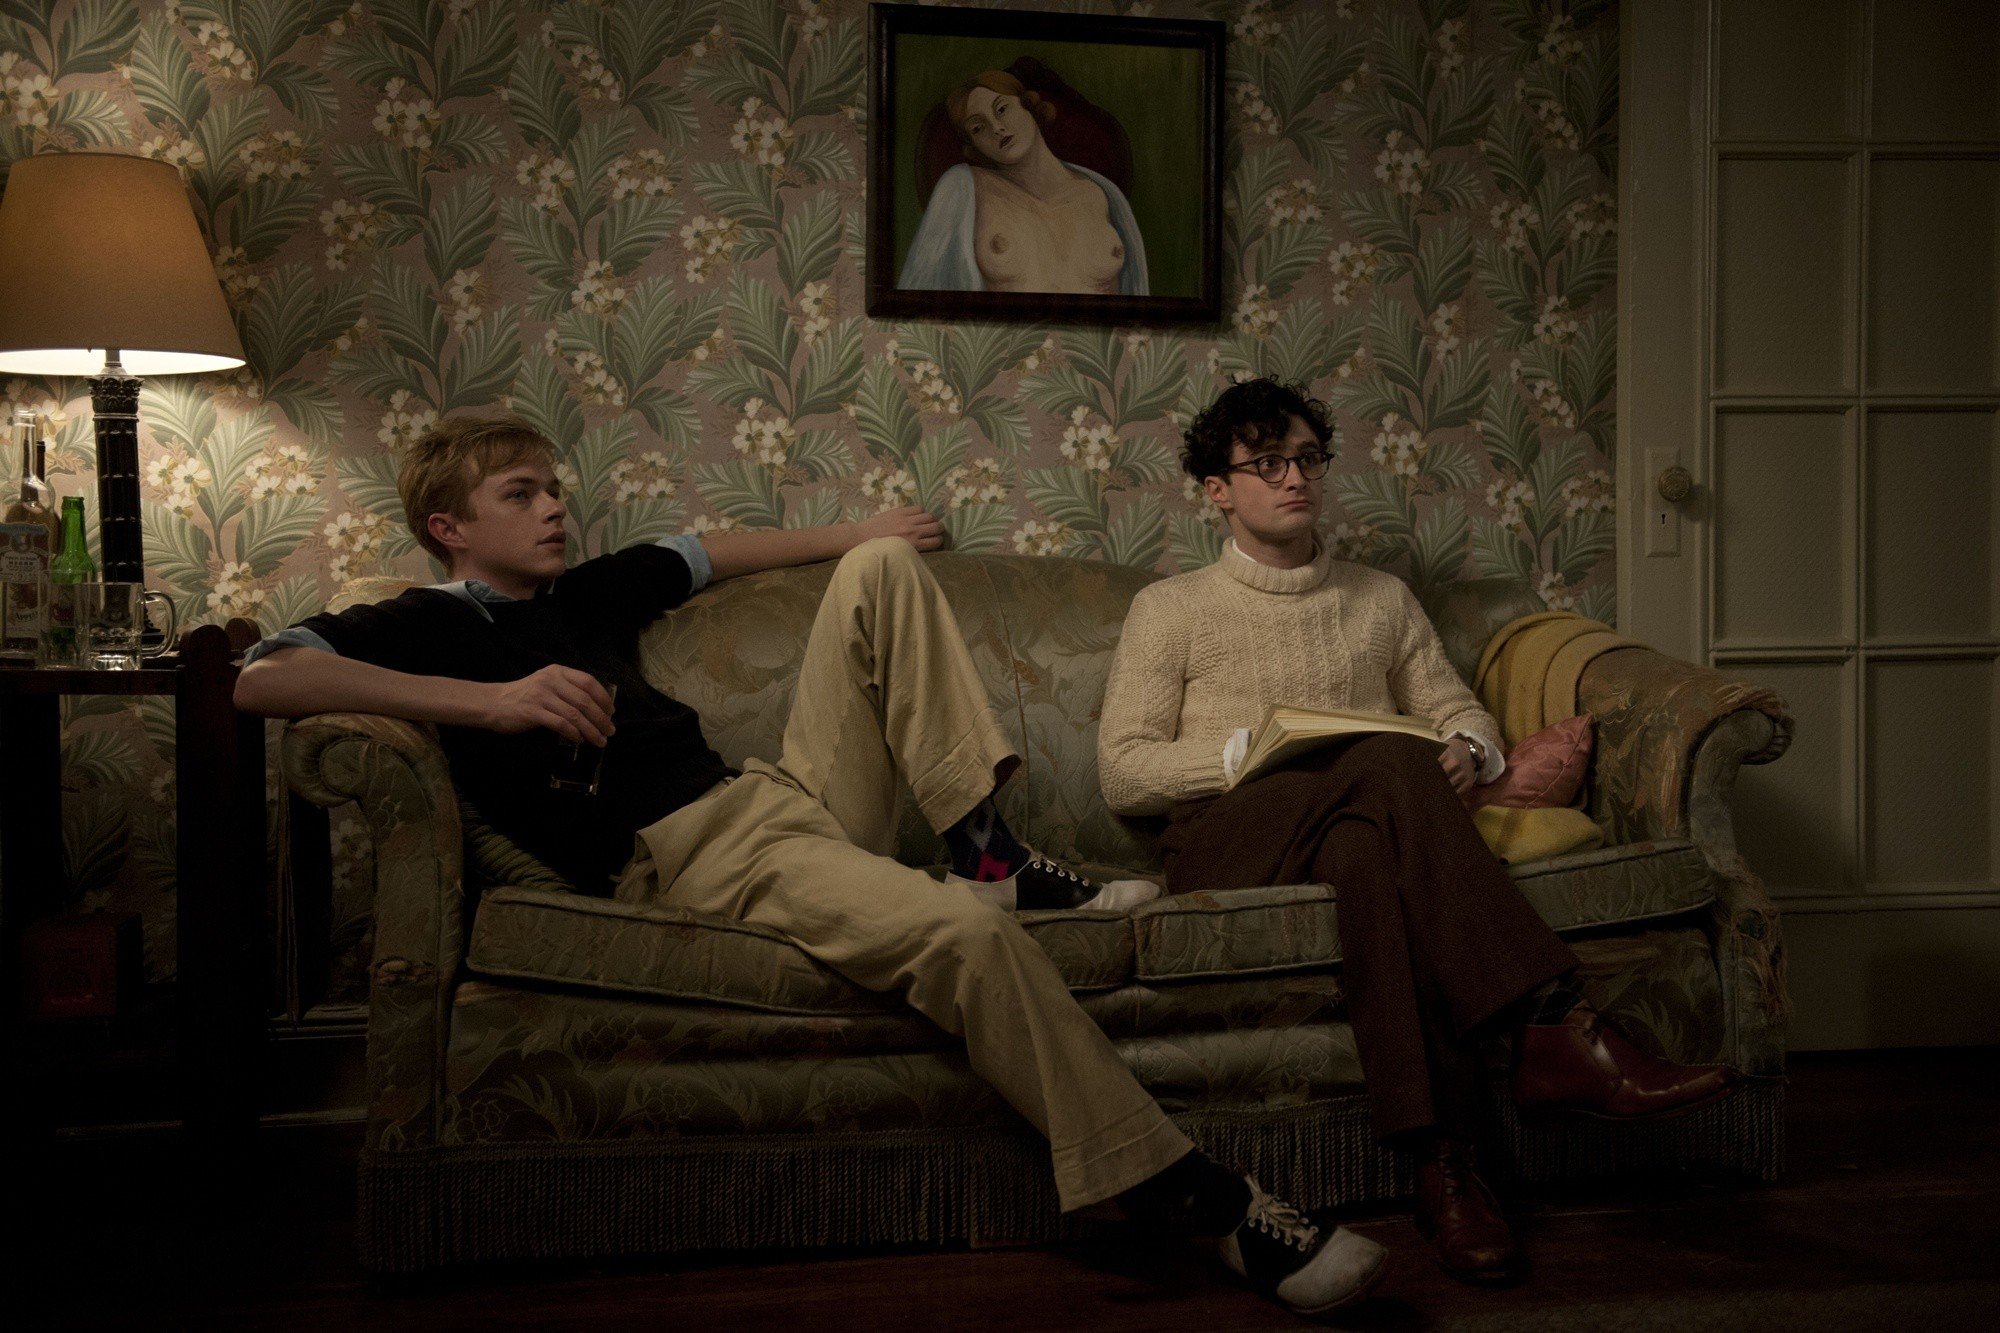 Dane DeHaan stars as Lucien Carr and Daniel Radcliffe stars as Allen Ginsberg in Sony Pictures Classics' Kill Your Darlings (2013)